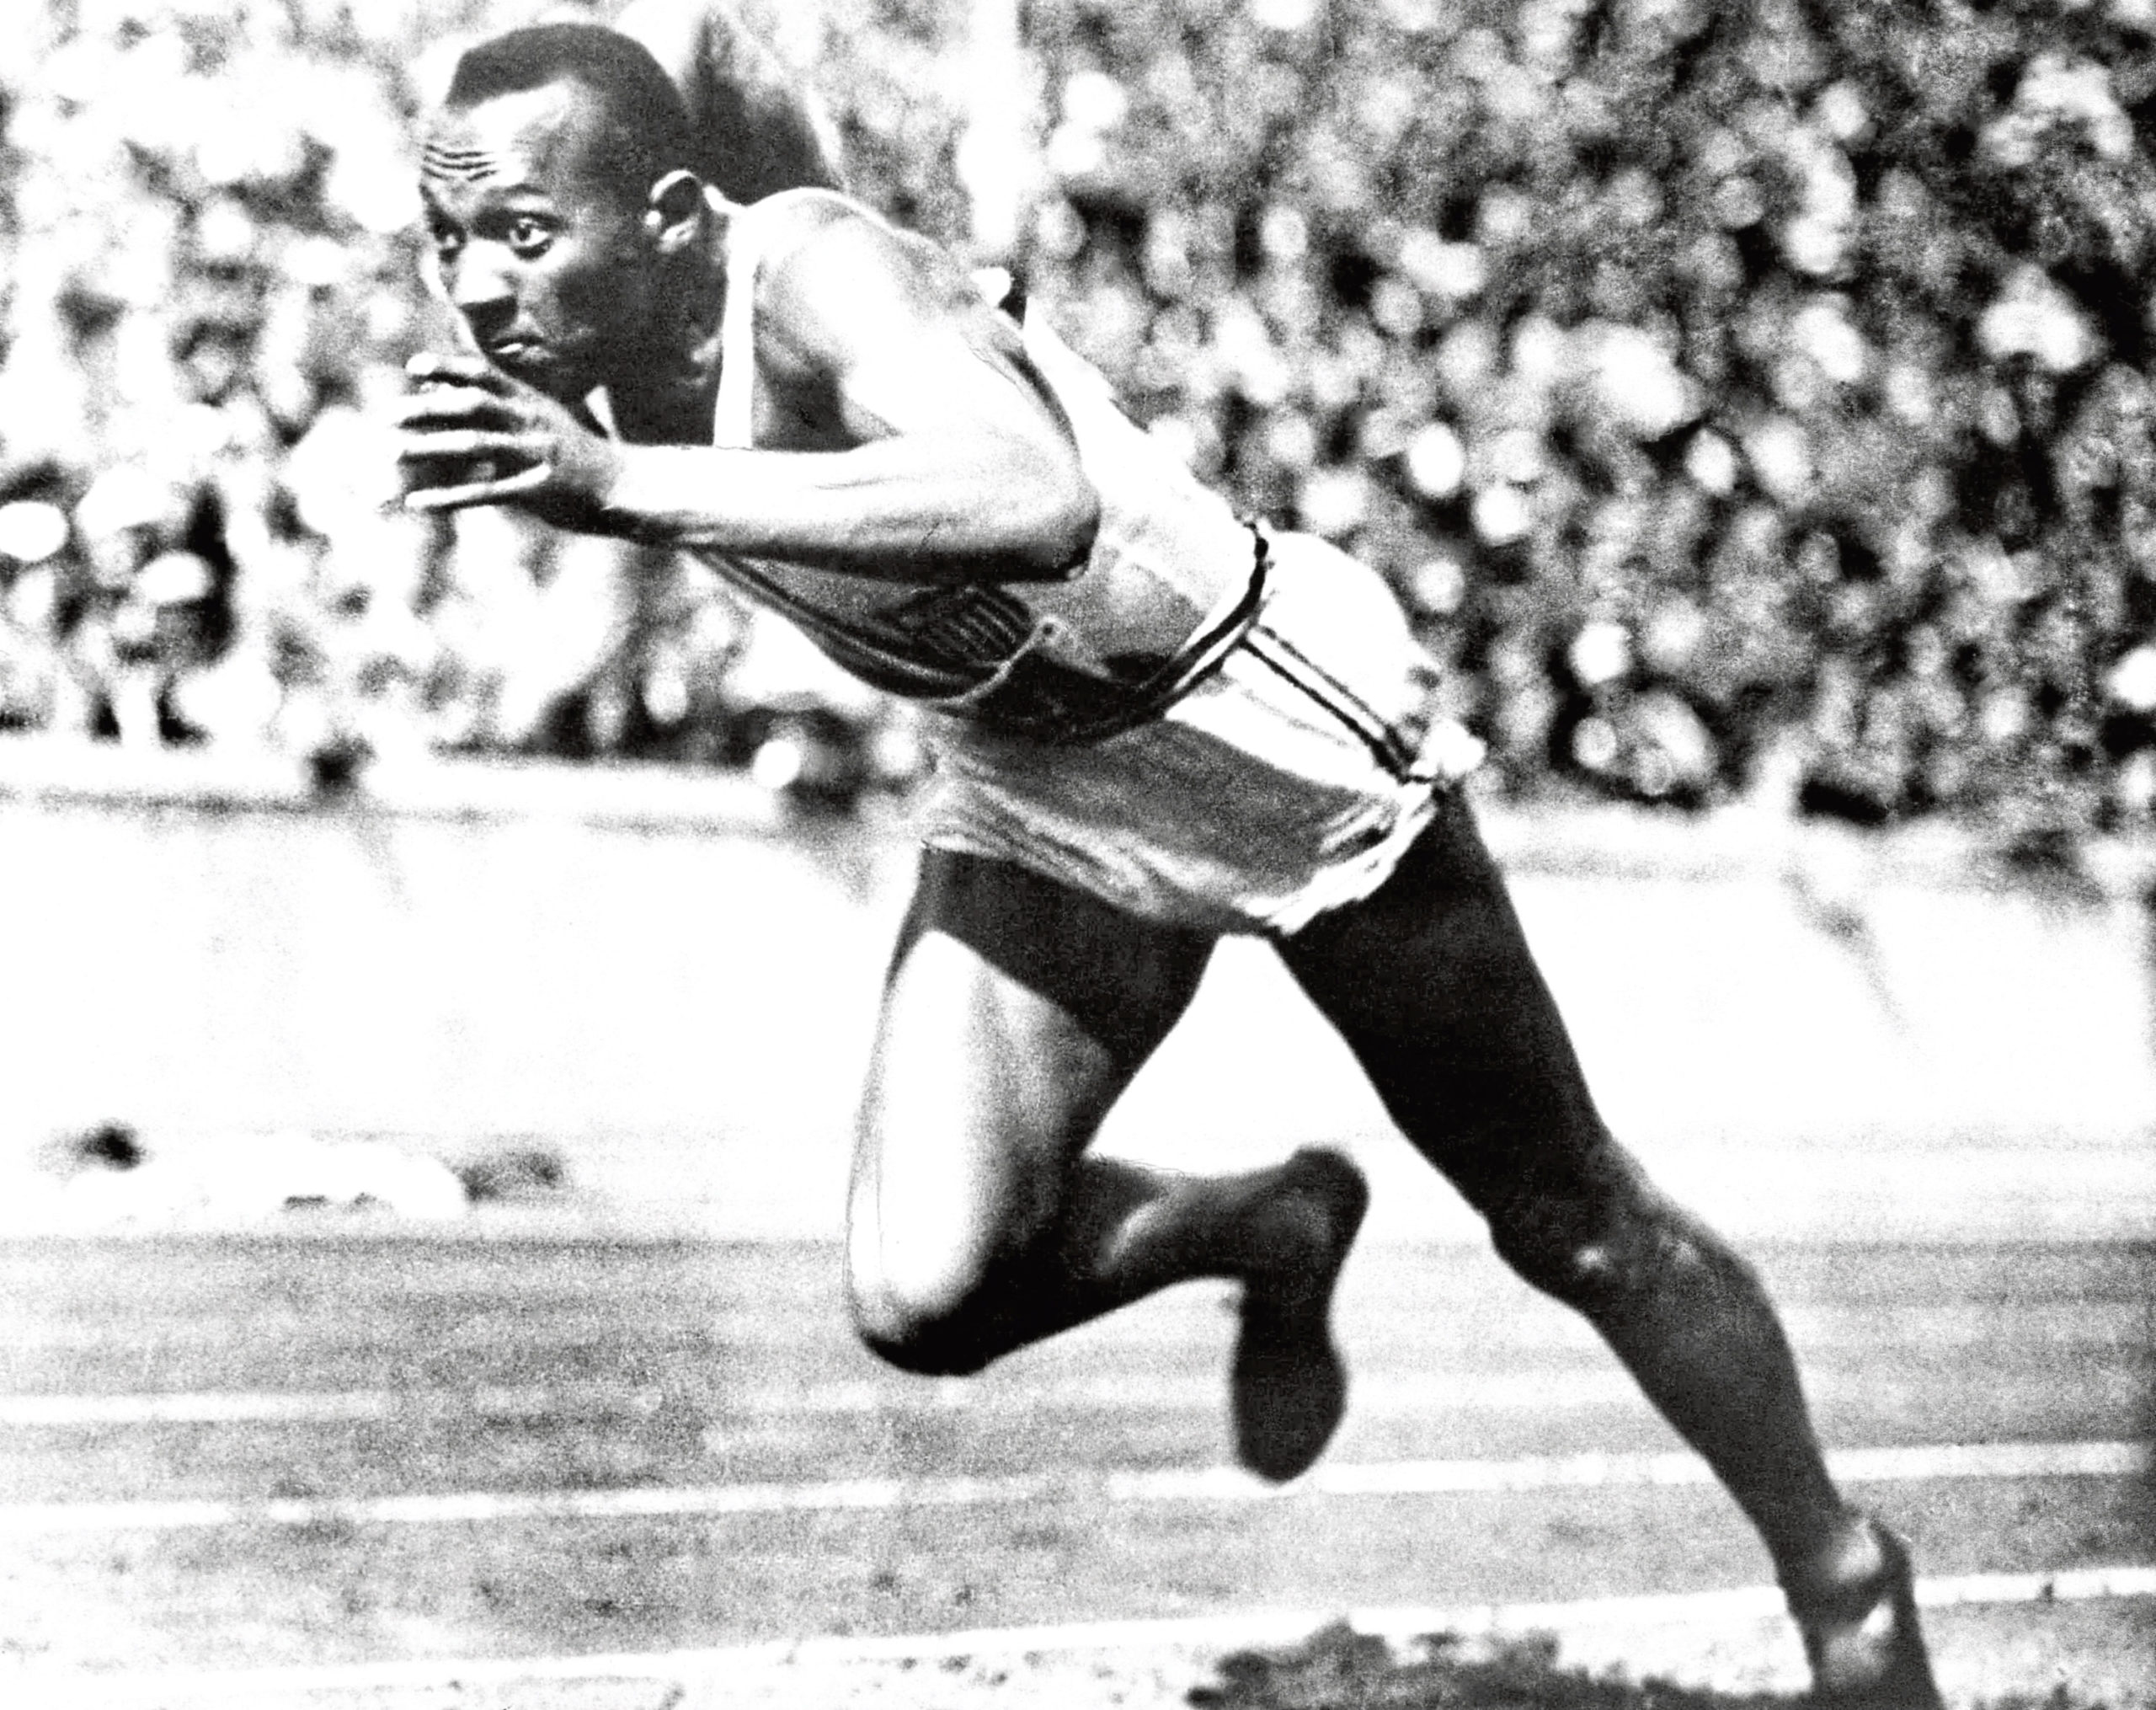 Jesse Owens competes in one of the heats of the 200-meter run at the 1936 Olympic Games in Berlin